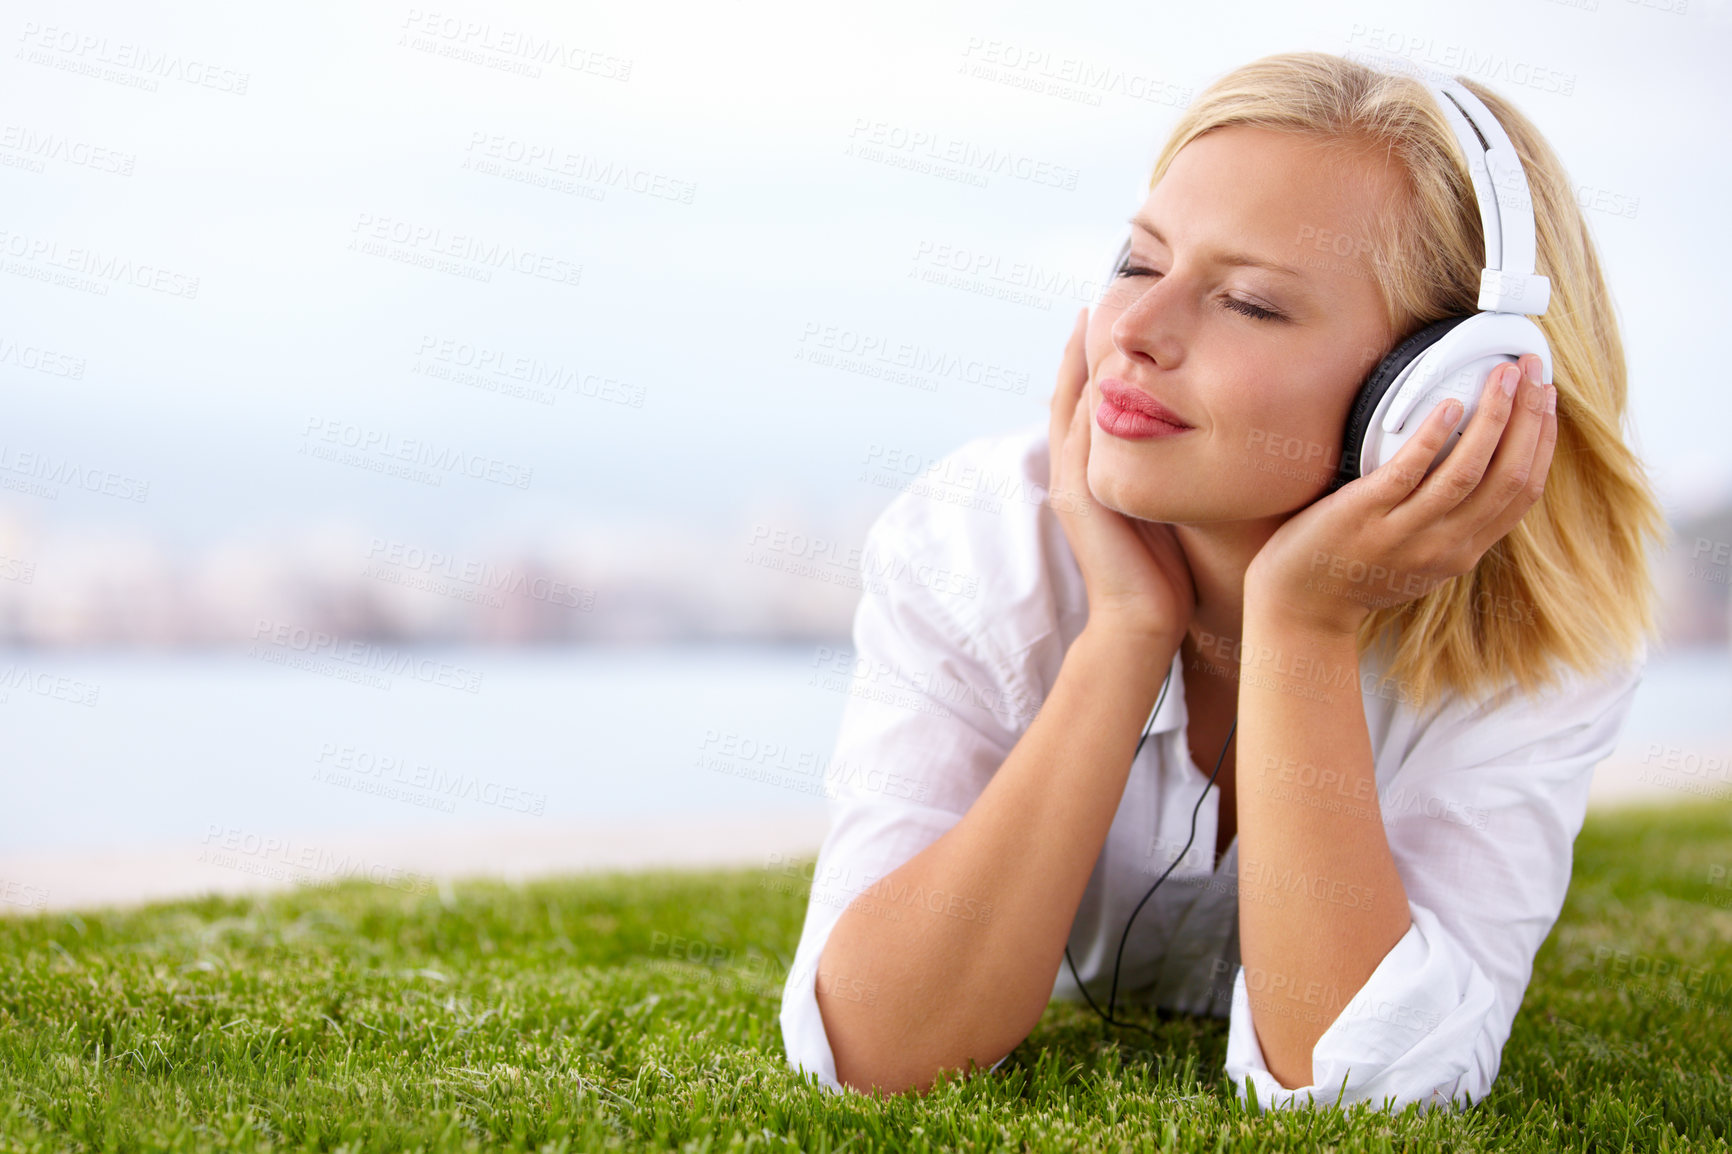 Buy stock photo Shot of a woman lying on a grassy field listening to music with her eyes closed